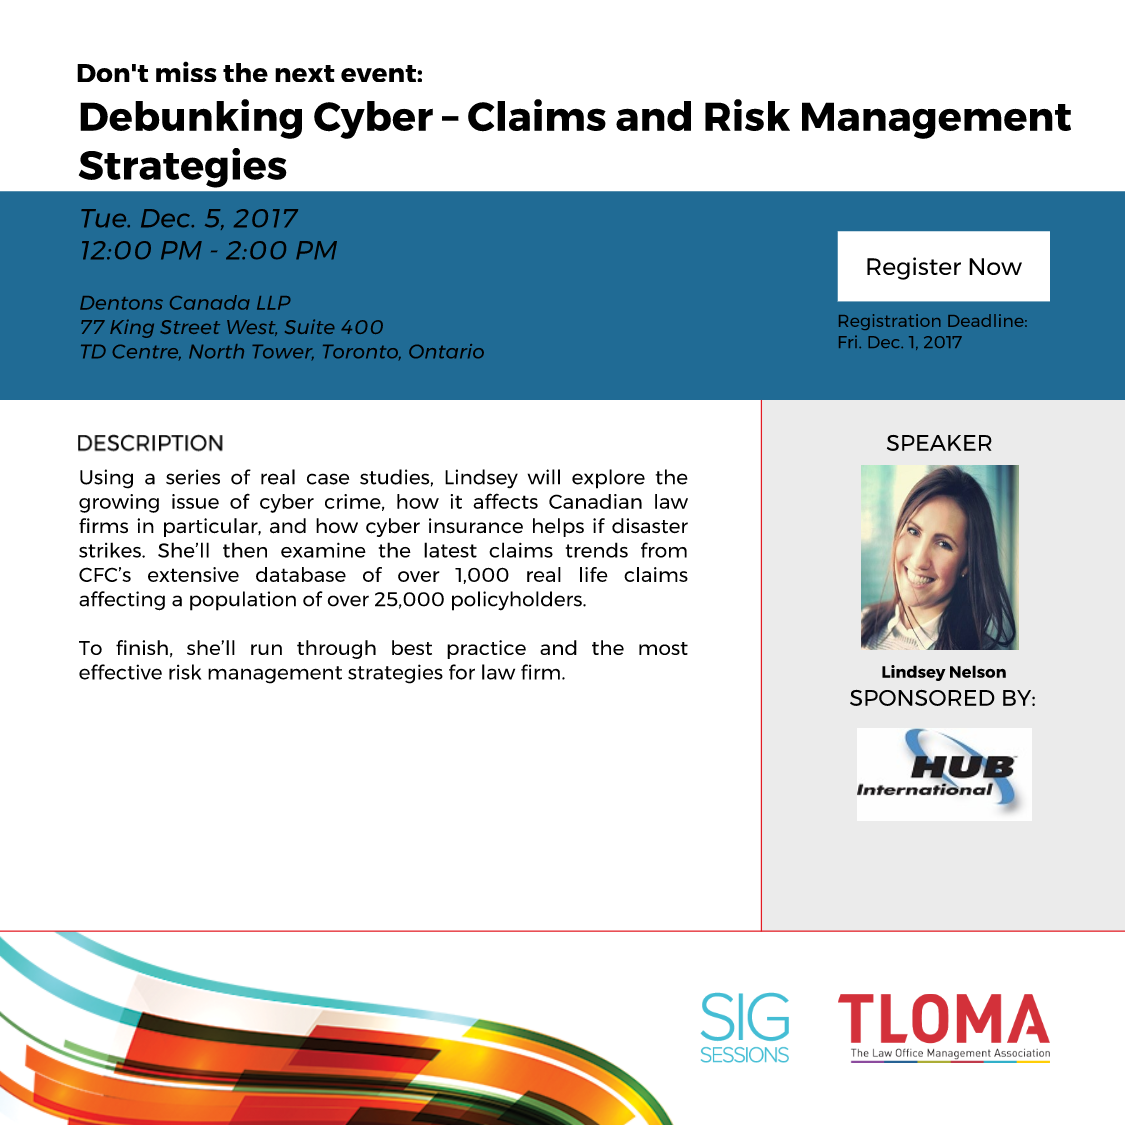 Debunking Cyber – Claims and Risk Management Strategies